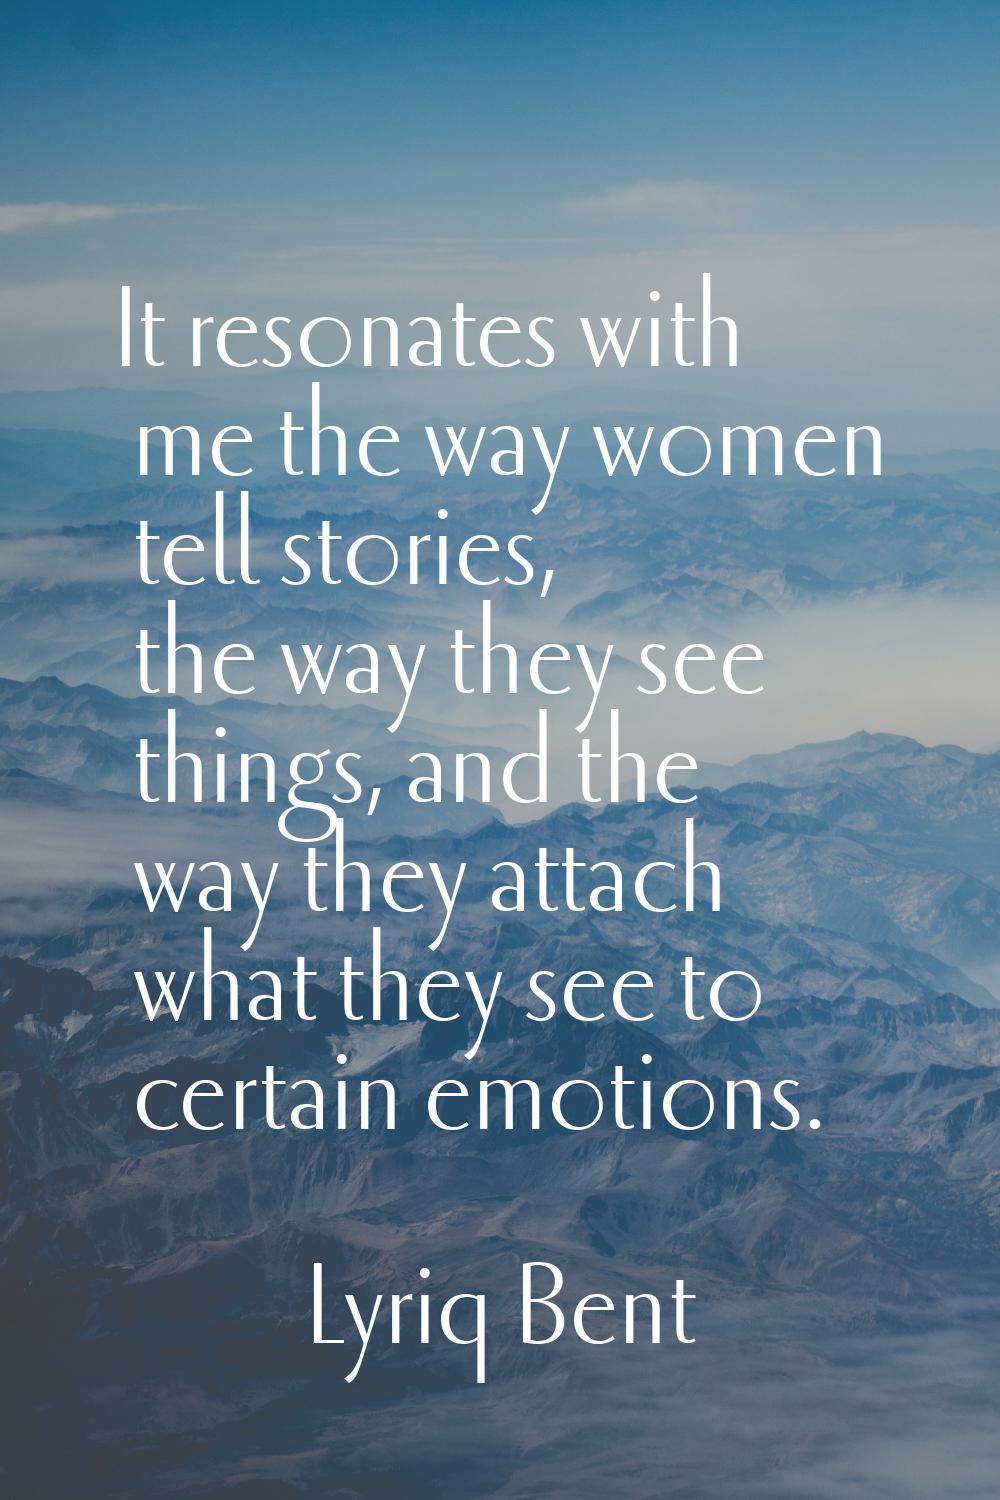 It resonates with me the way women tell stories, the way they see things, and the way they attach w